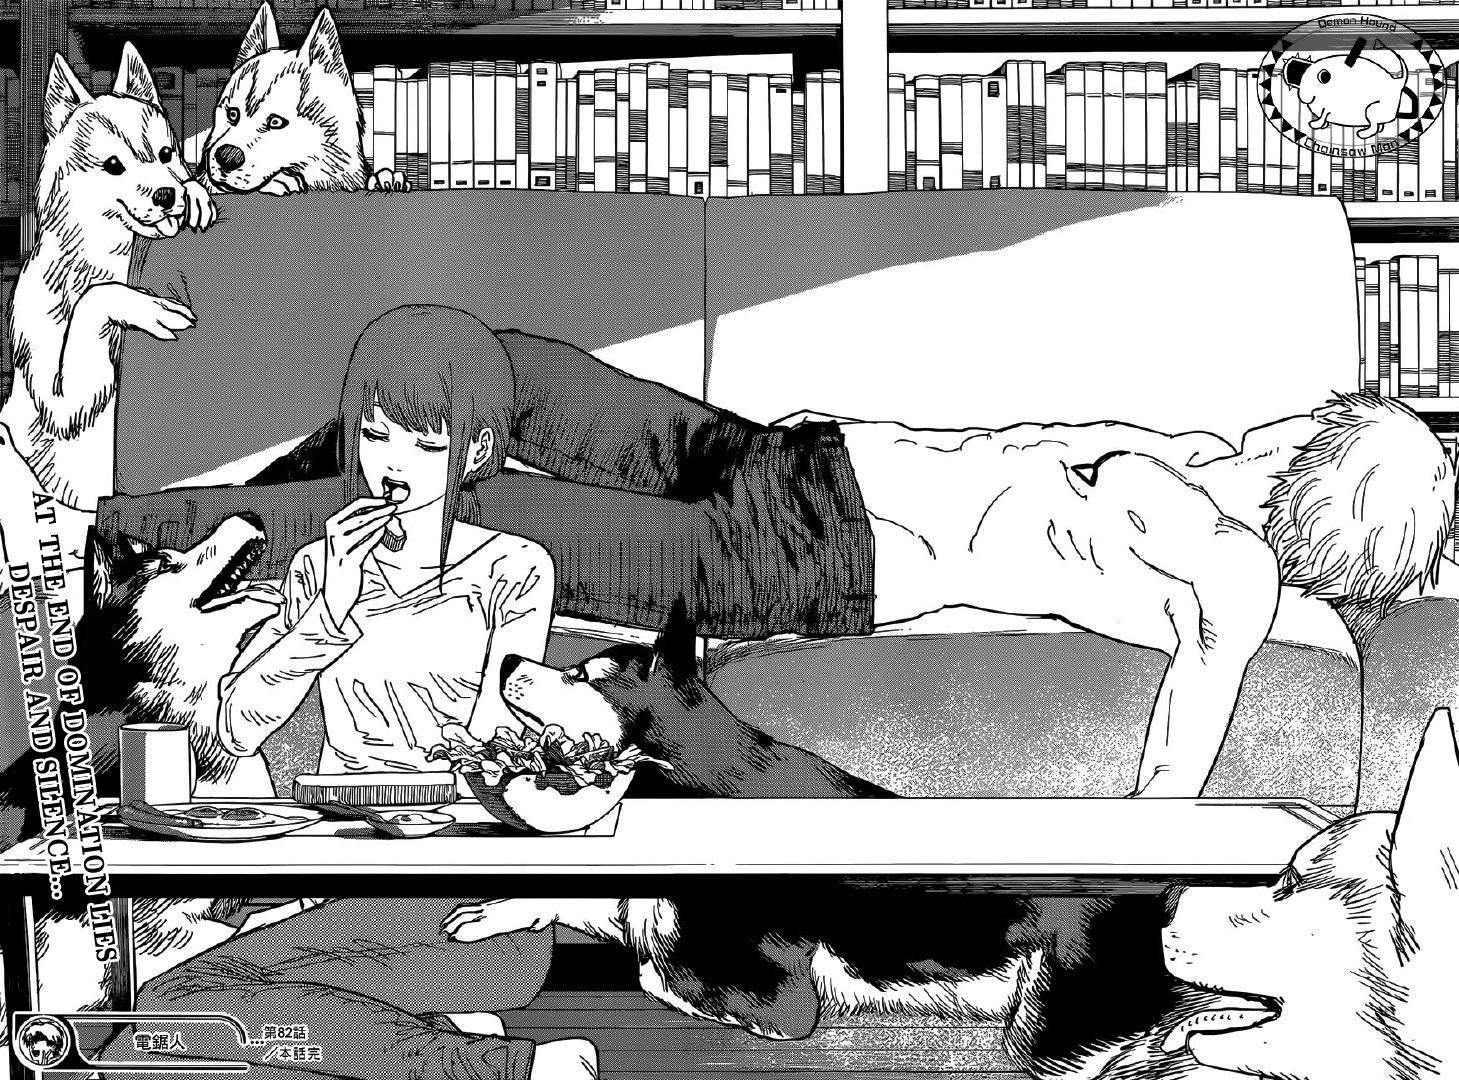 Chainsaw Man Chapter 82 Discussion.